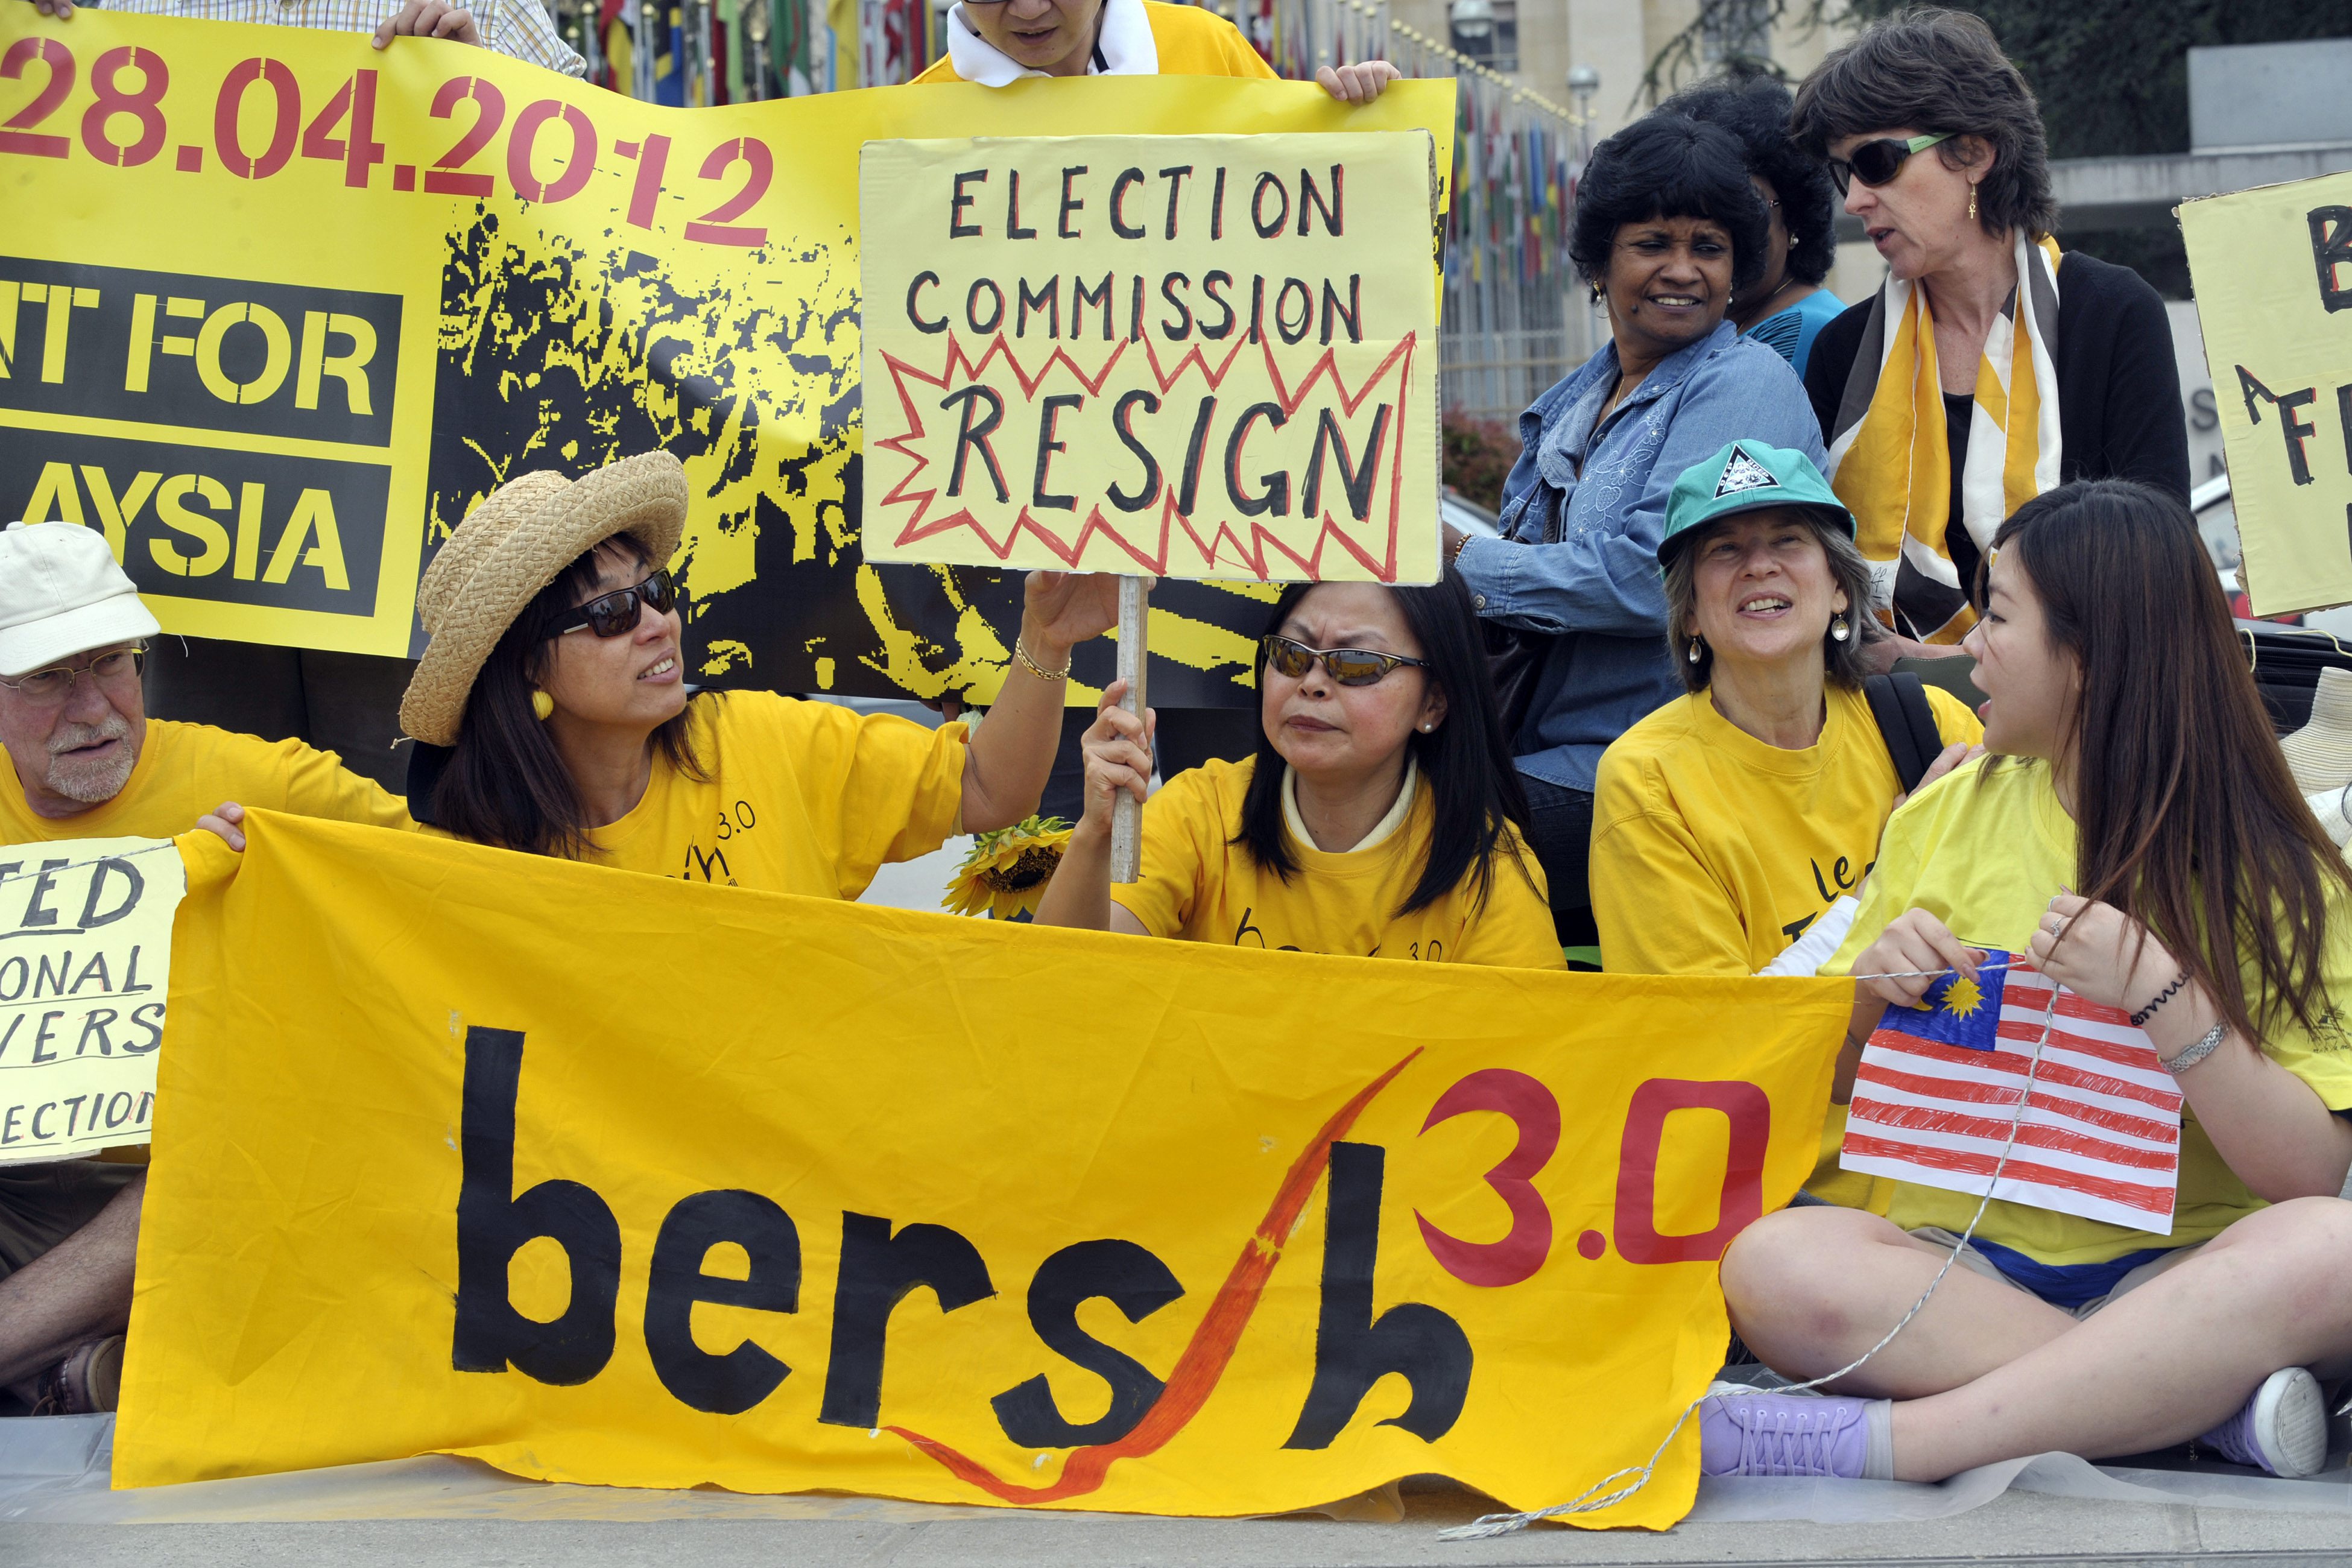 Demonstrators of the Malayan movement Bersih for democracy hold banners to ask for free and fair elections in Malaysia in front of the European headquarters of the United Nations in Geneva on April 28, 2012.